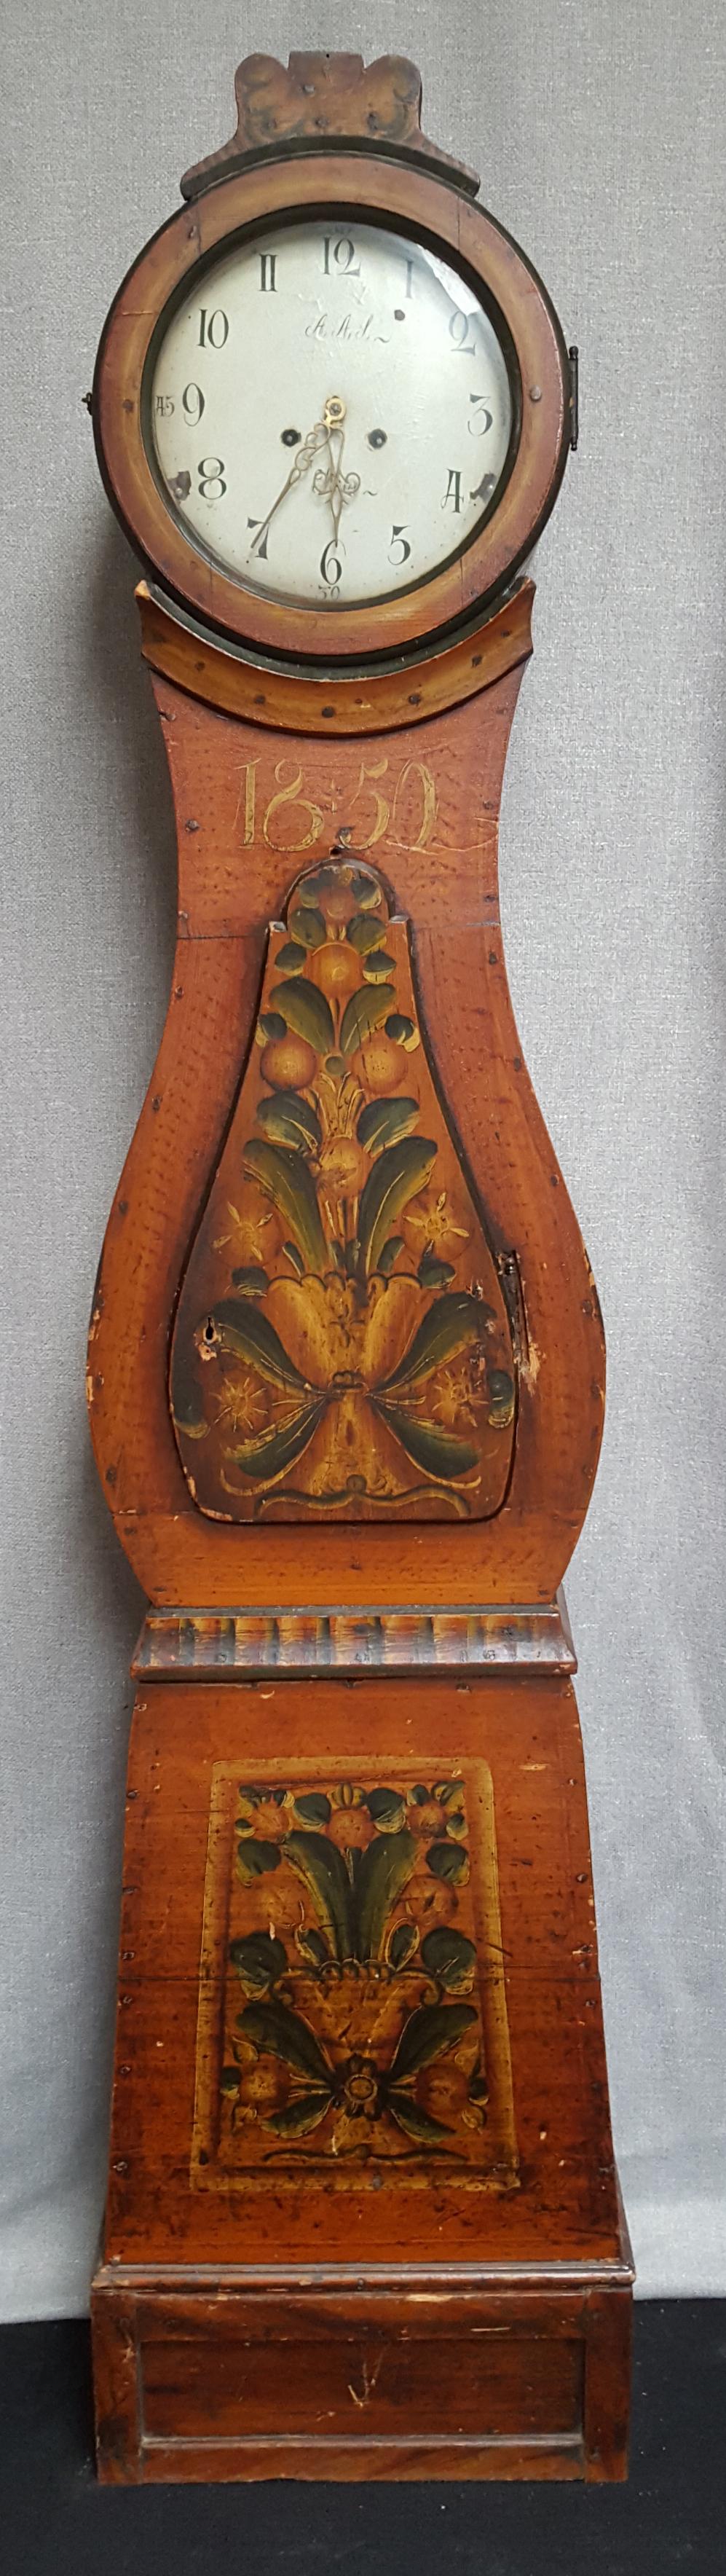 Antique Swedish Mora clock from early 1800s ( dated 1850) in probable original paint with a great country mora clock shape body and a good face with lots of detail and clean face. 

It has the Classic motifs and coloring of a traditional Swedish